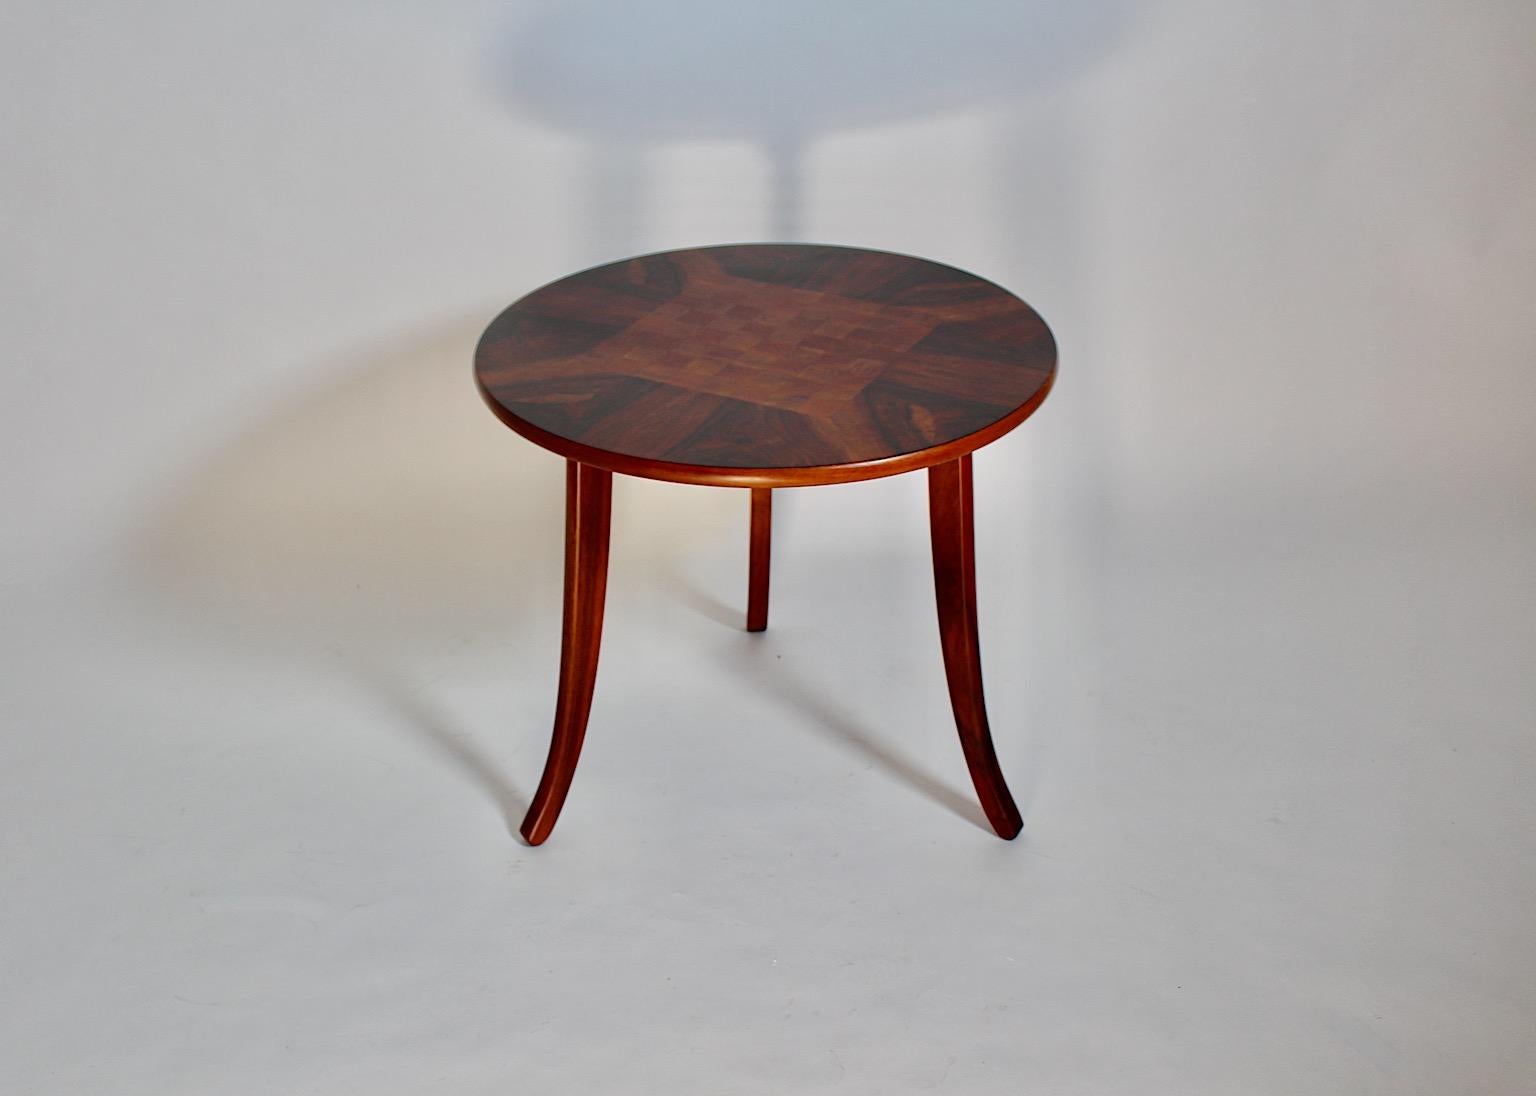 Art Deco Vintage Circular Side Table Chess Walnut Cherry Josef Frank circa 1925 In Good Condition For Sale In Vienna, AT